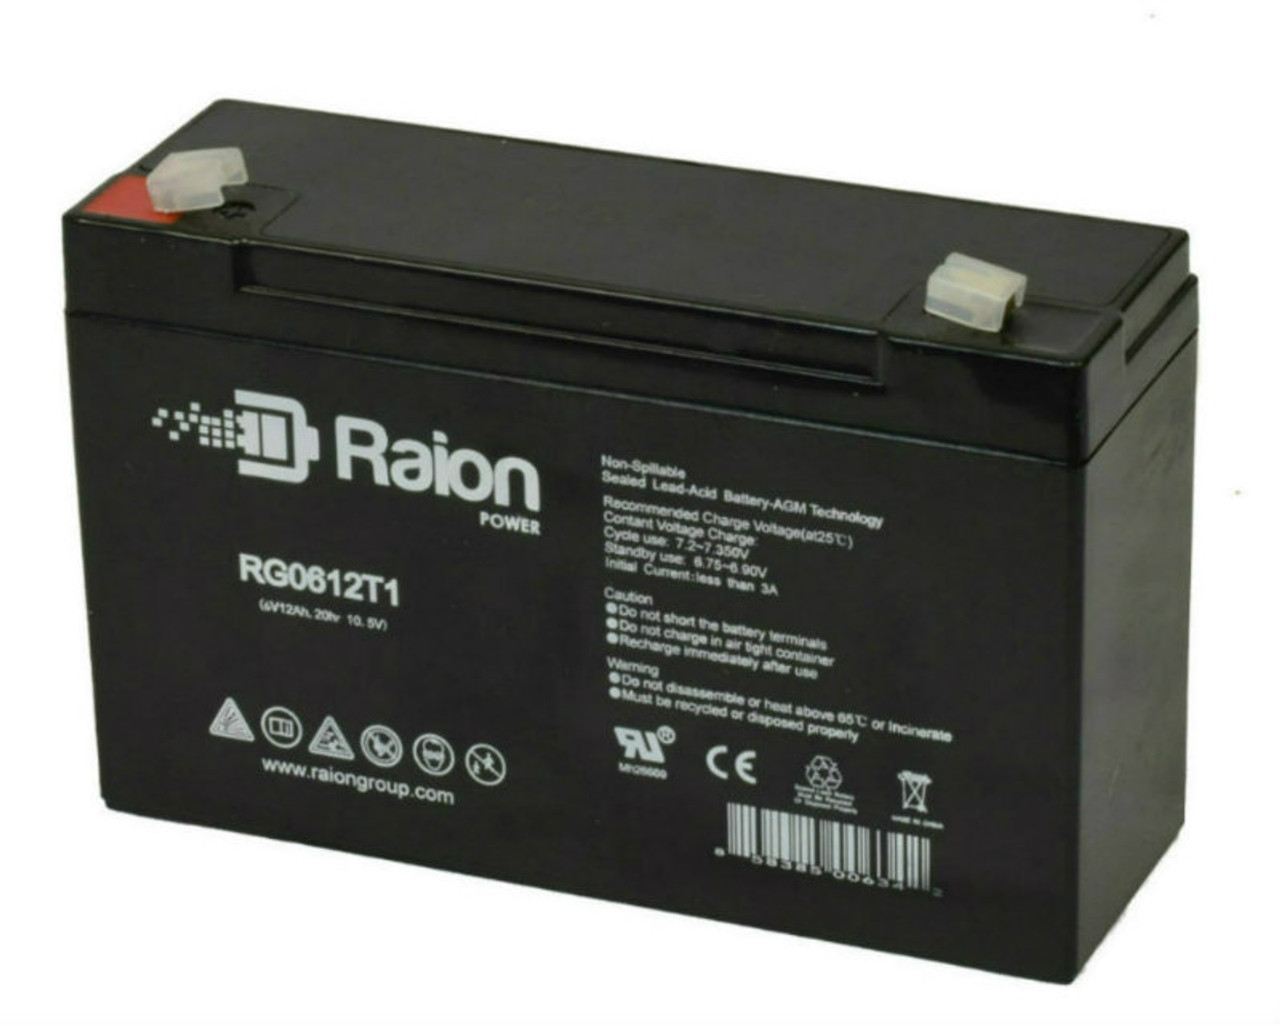 Raion Power RG06120T1 Replacement Battery for Koyama NP10-6